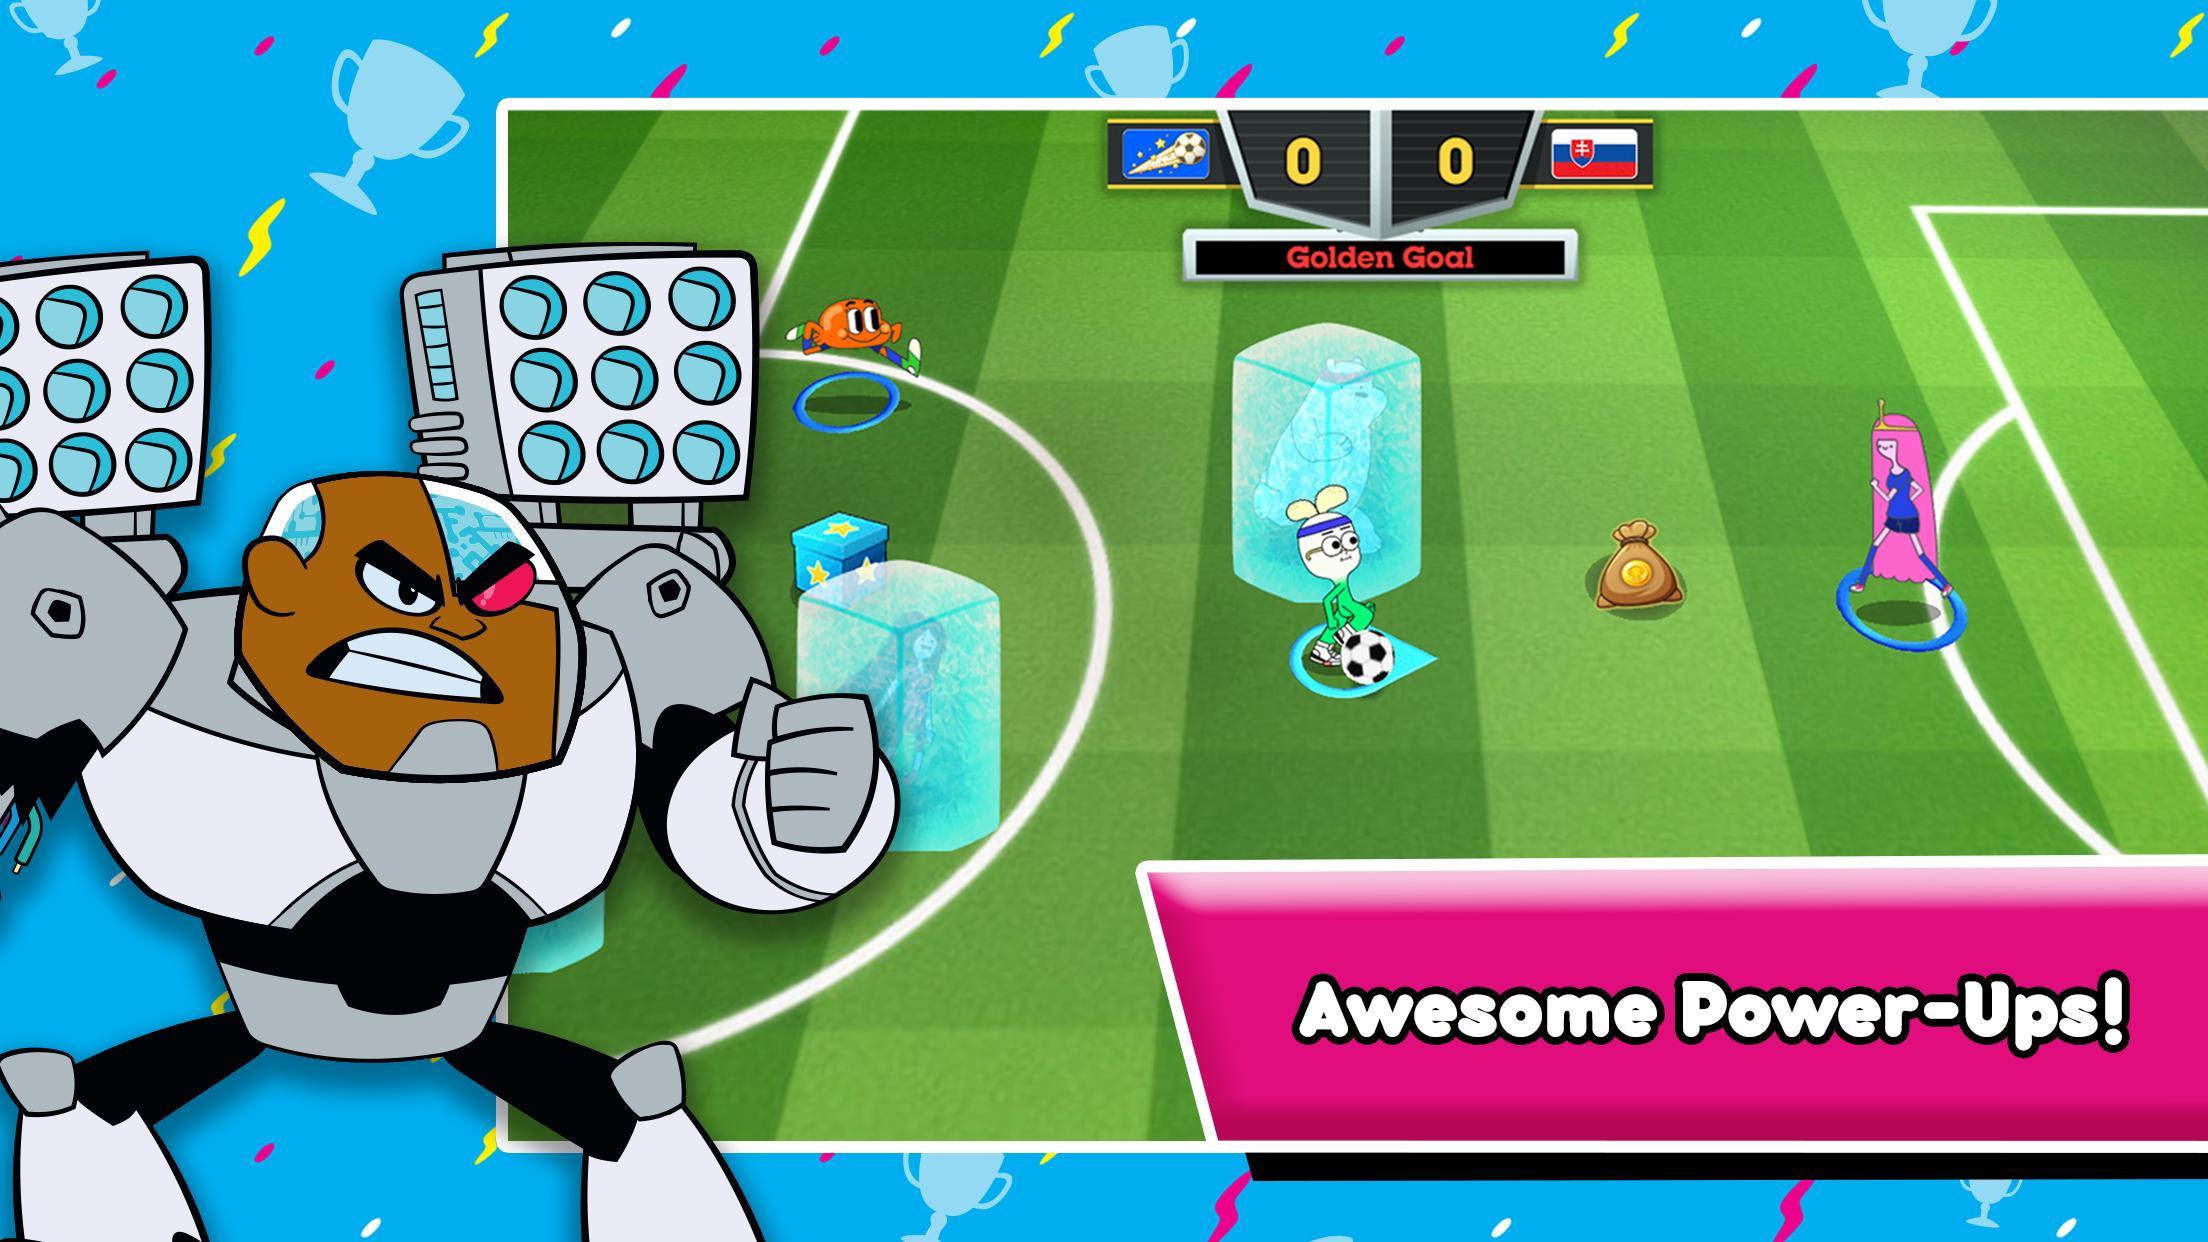 Toon Cup - Cartoon Network’s Soccer Game for Android - APK Download